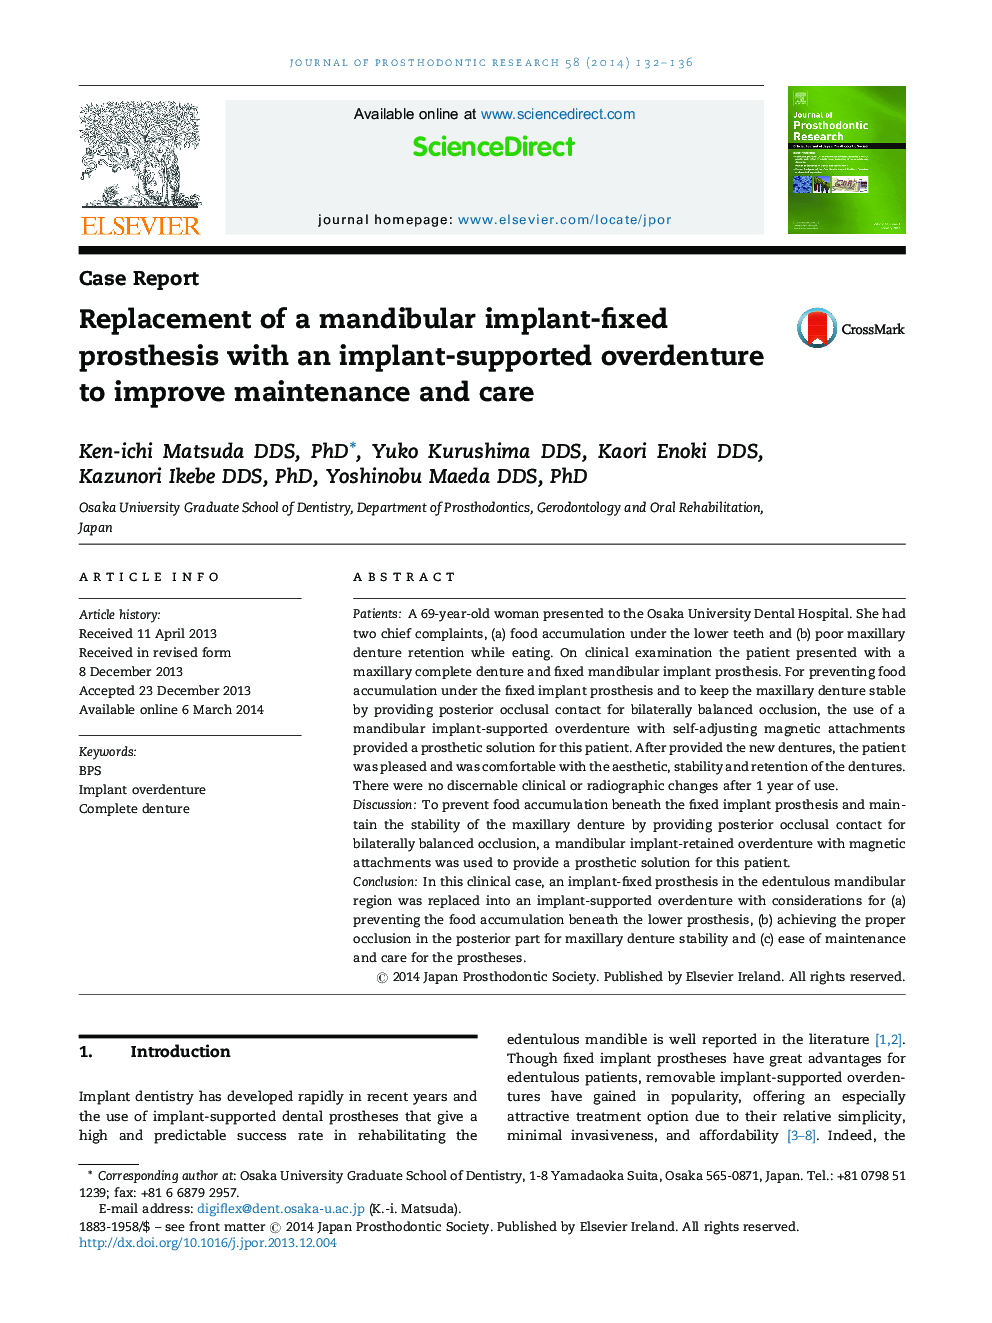 Replacement of a mandibular implant-fixed prosthesis with an implant-supported overdenture to improve maintenance and care